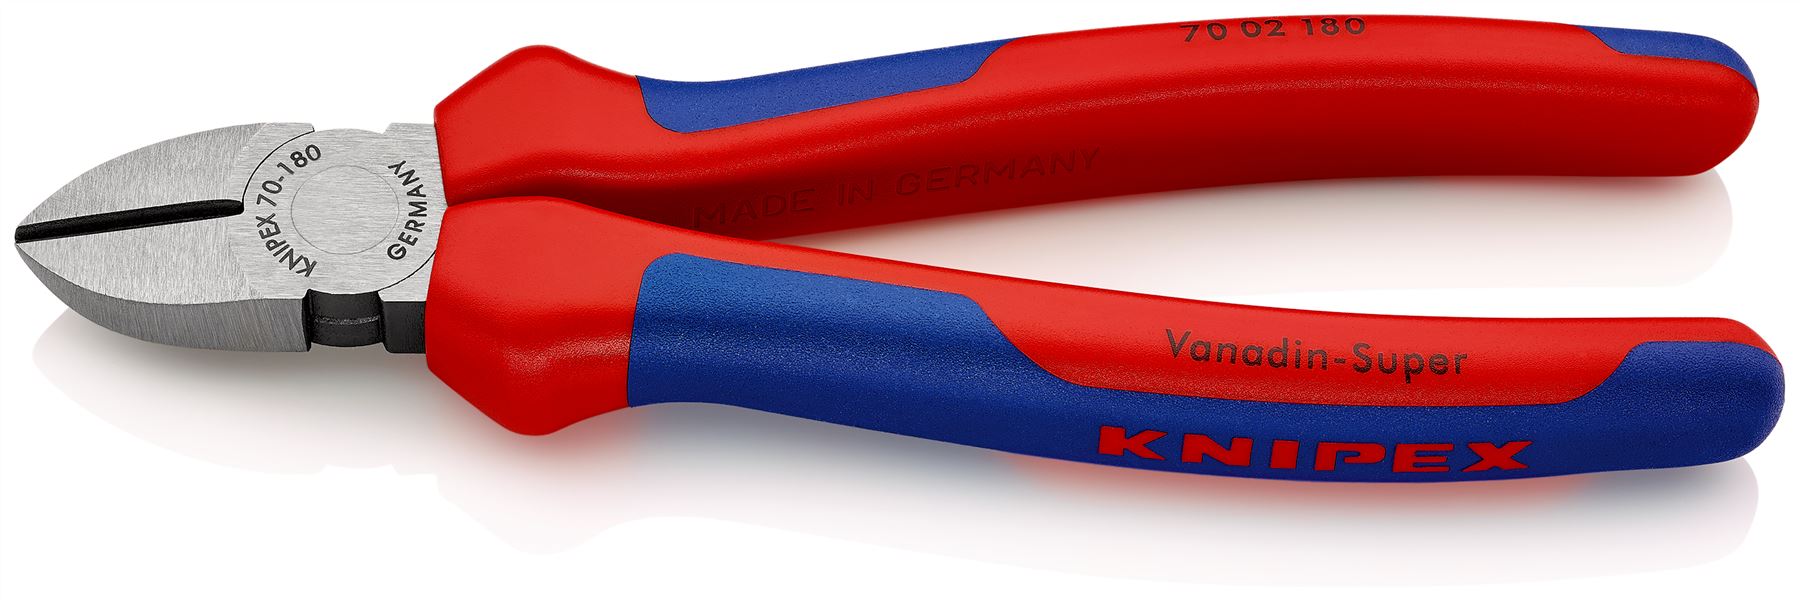 Knipex Diagonal Side Cutting Pliers 180mm Multi Component Grips 70 02 125